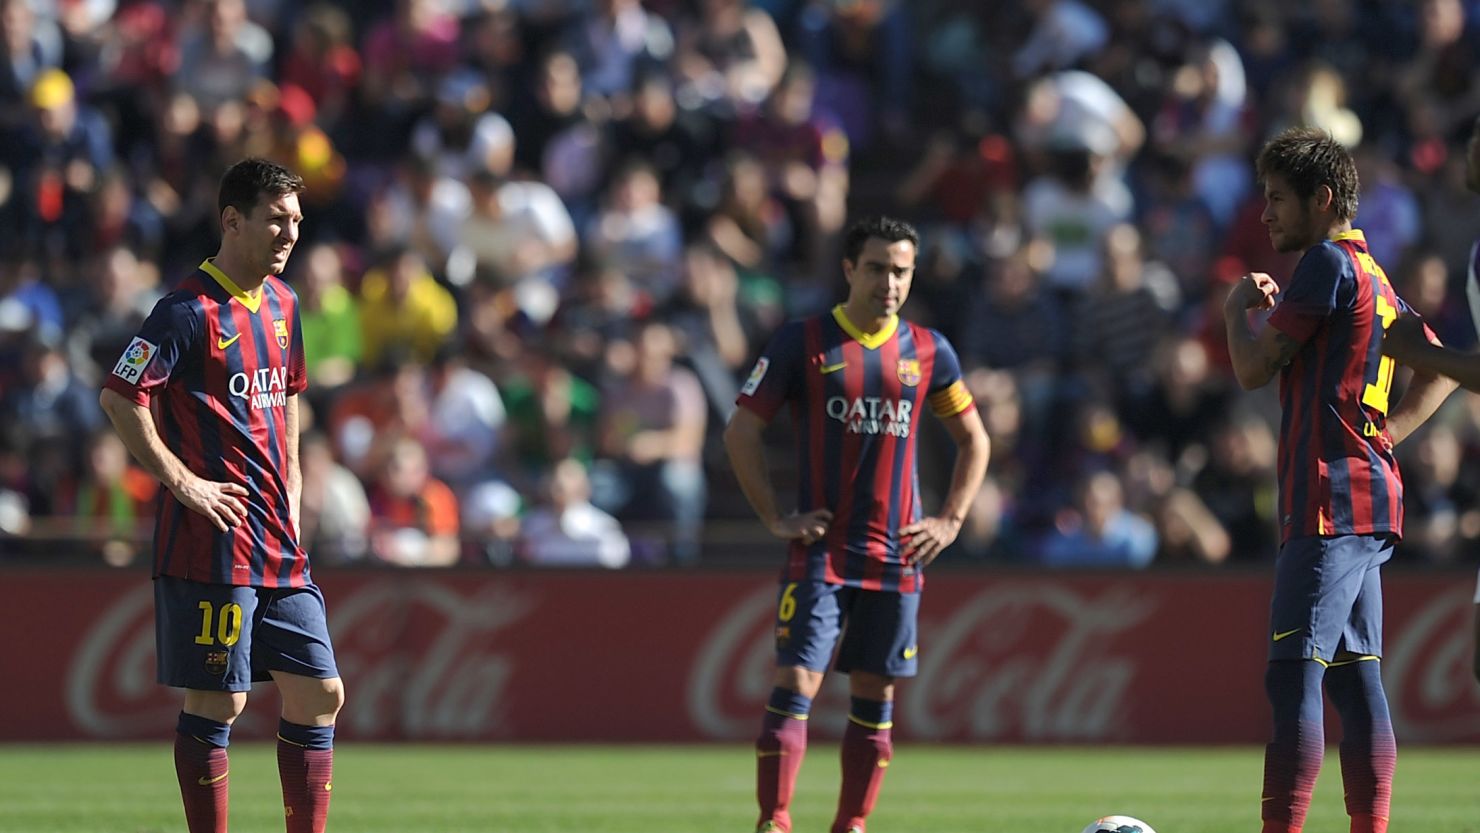 Dejected Barcelona players contemplate defeat at lowly Valladolid in La Liga.